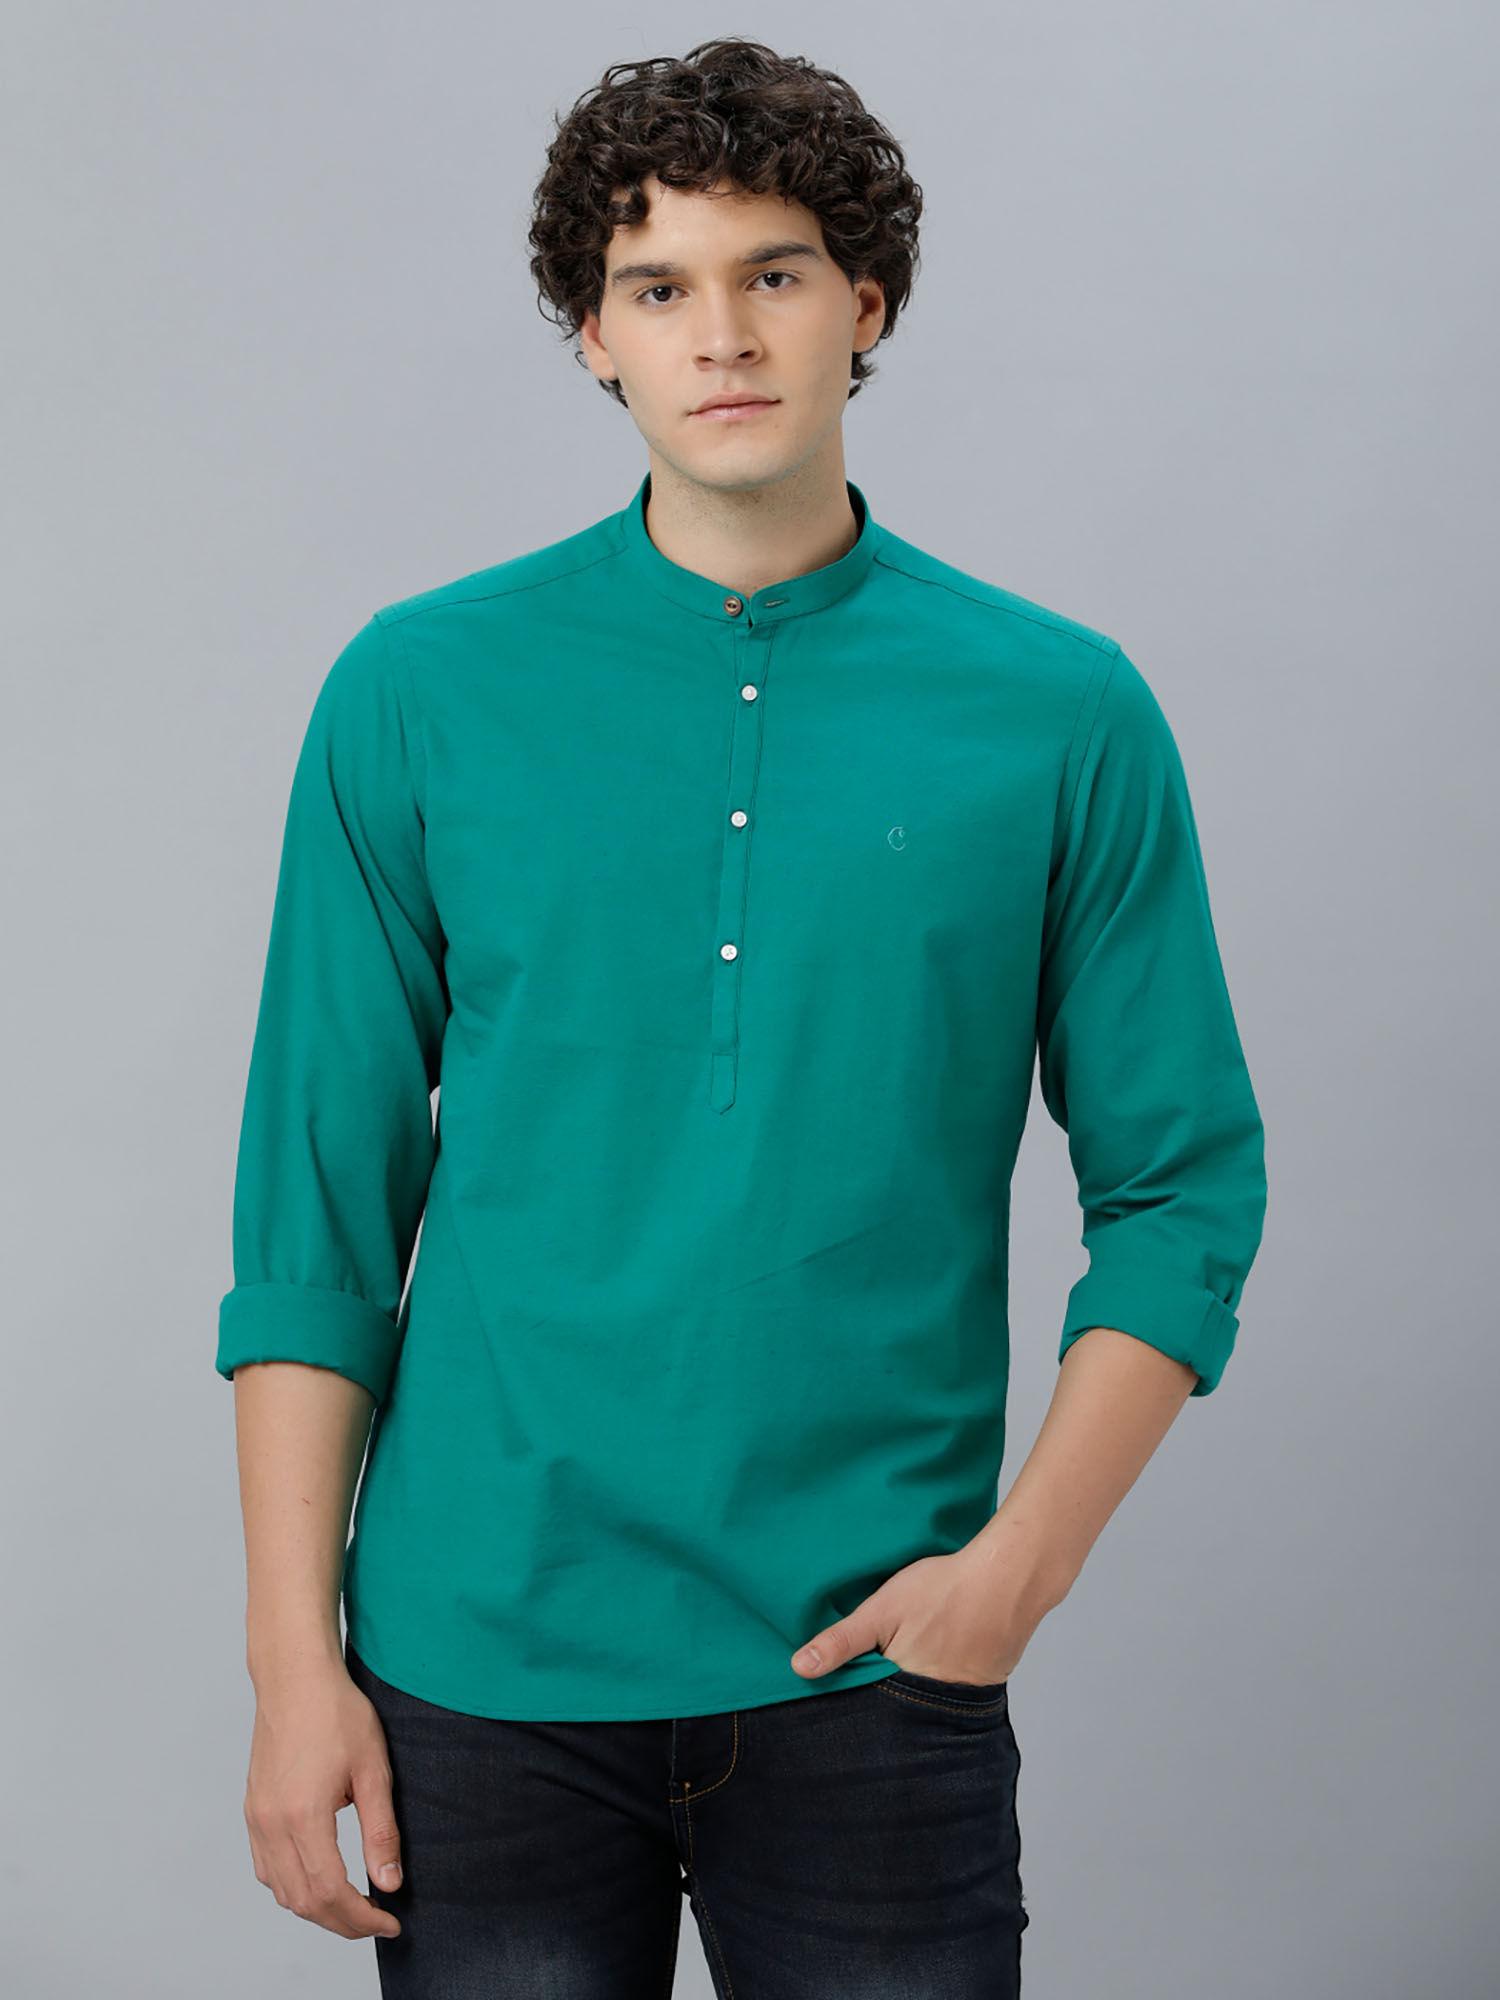 men's-cotton-linen-green-solid-slim-fit-full-sleeve-casual-shirt